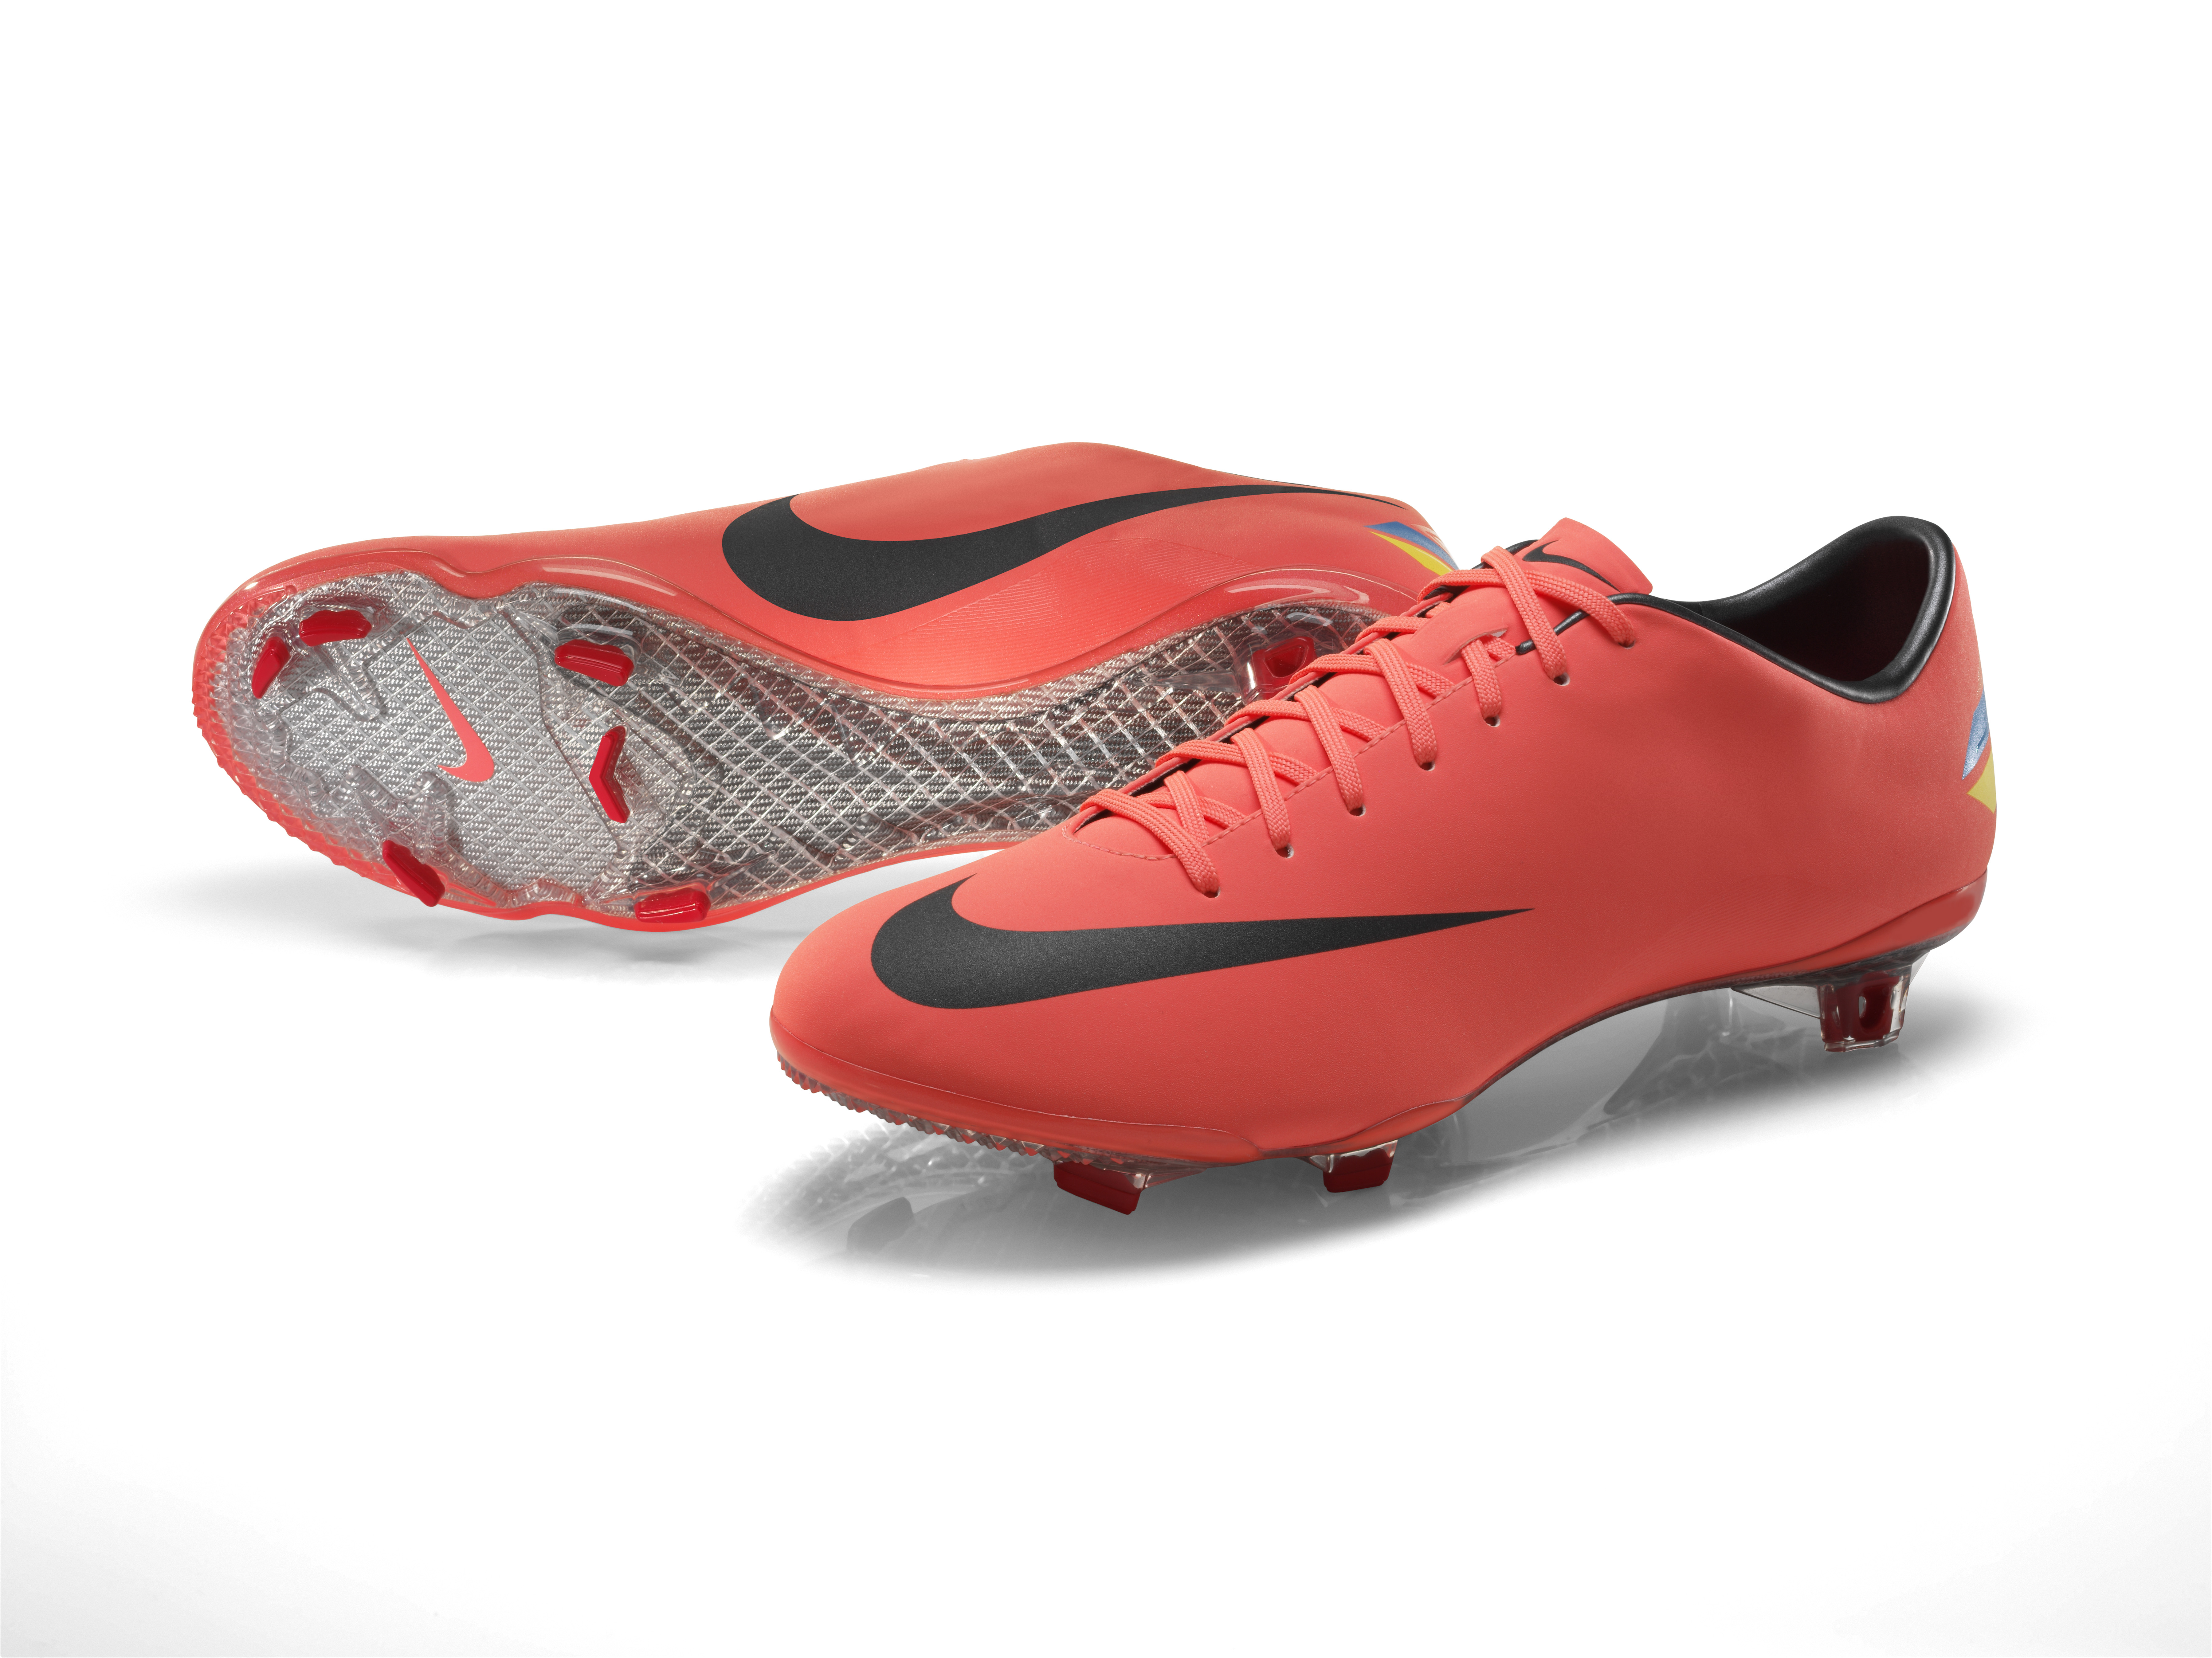 New Nike Football Boots 2012 13